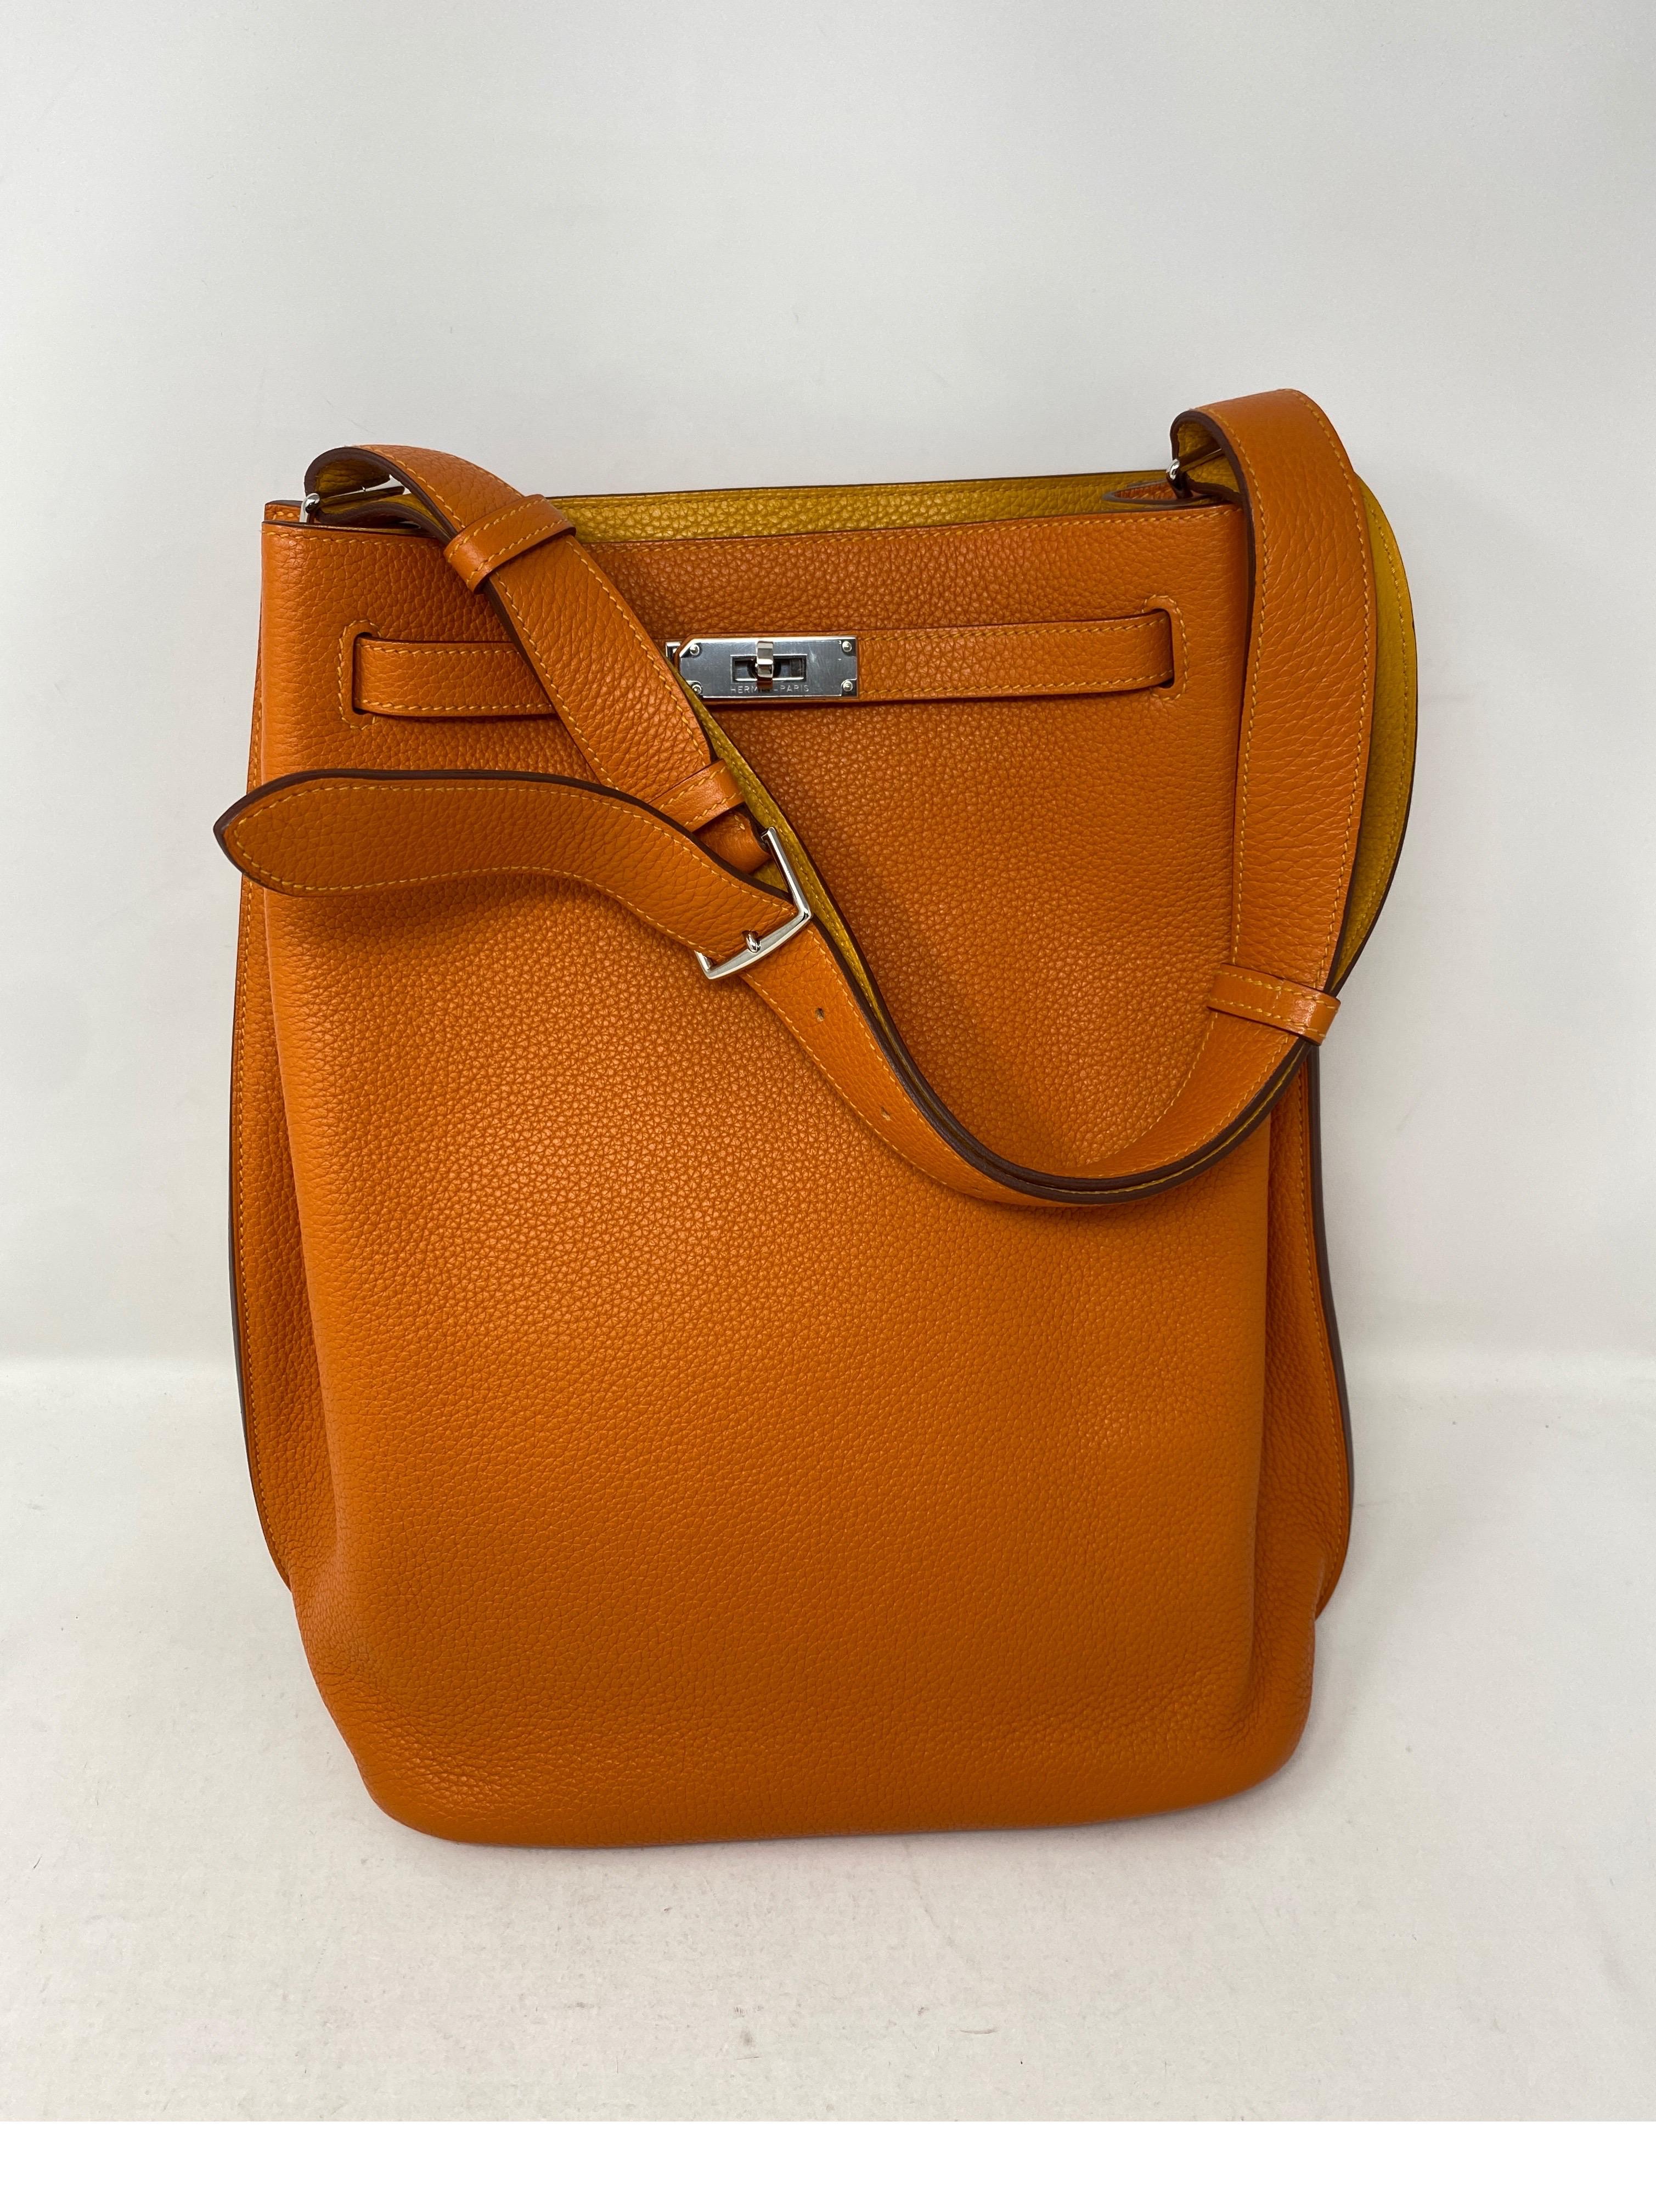 Hermes So Kelly Orange Candy Bag. Orange exterior and yellow interior leather. Palladium hardware. Excellent like new condition. Gorgeous bag. Iconic Hermes Orange color. Clemence leather. Guaranteed authentic. 